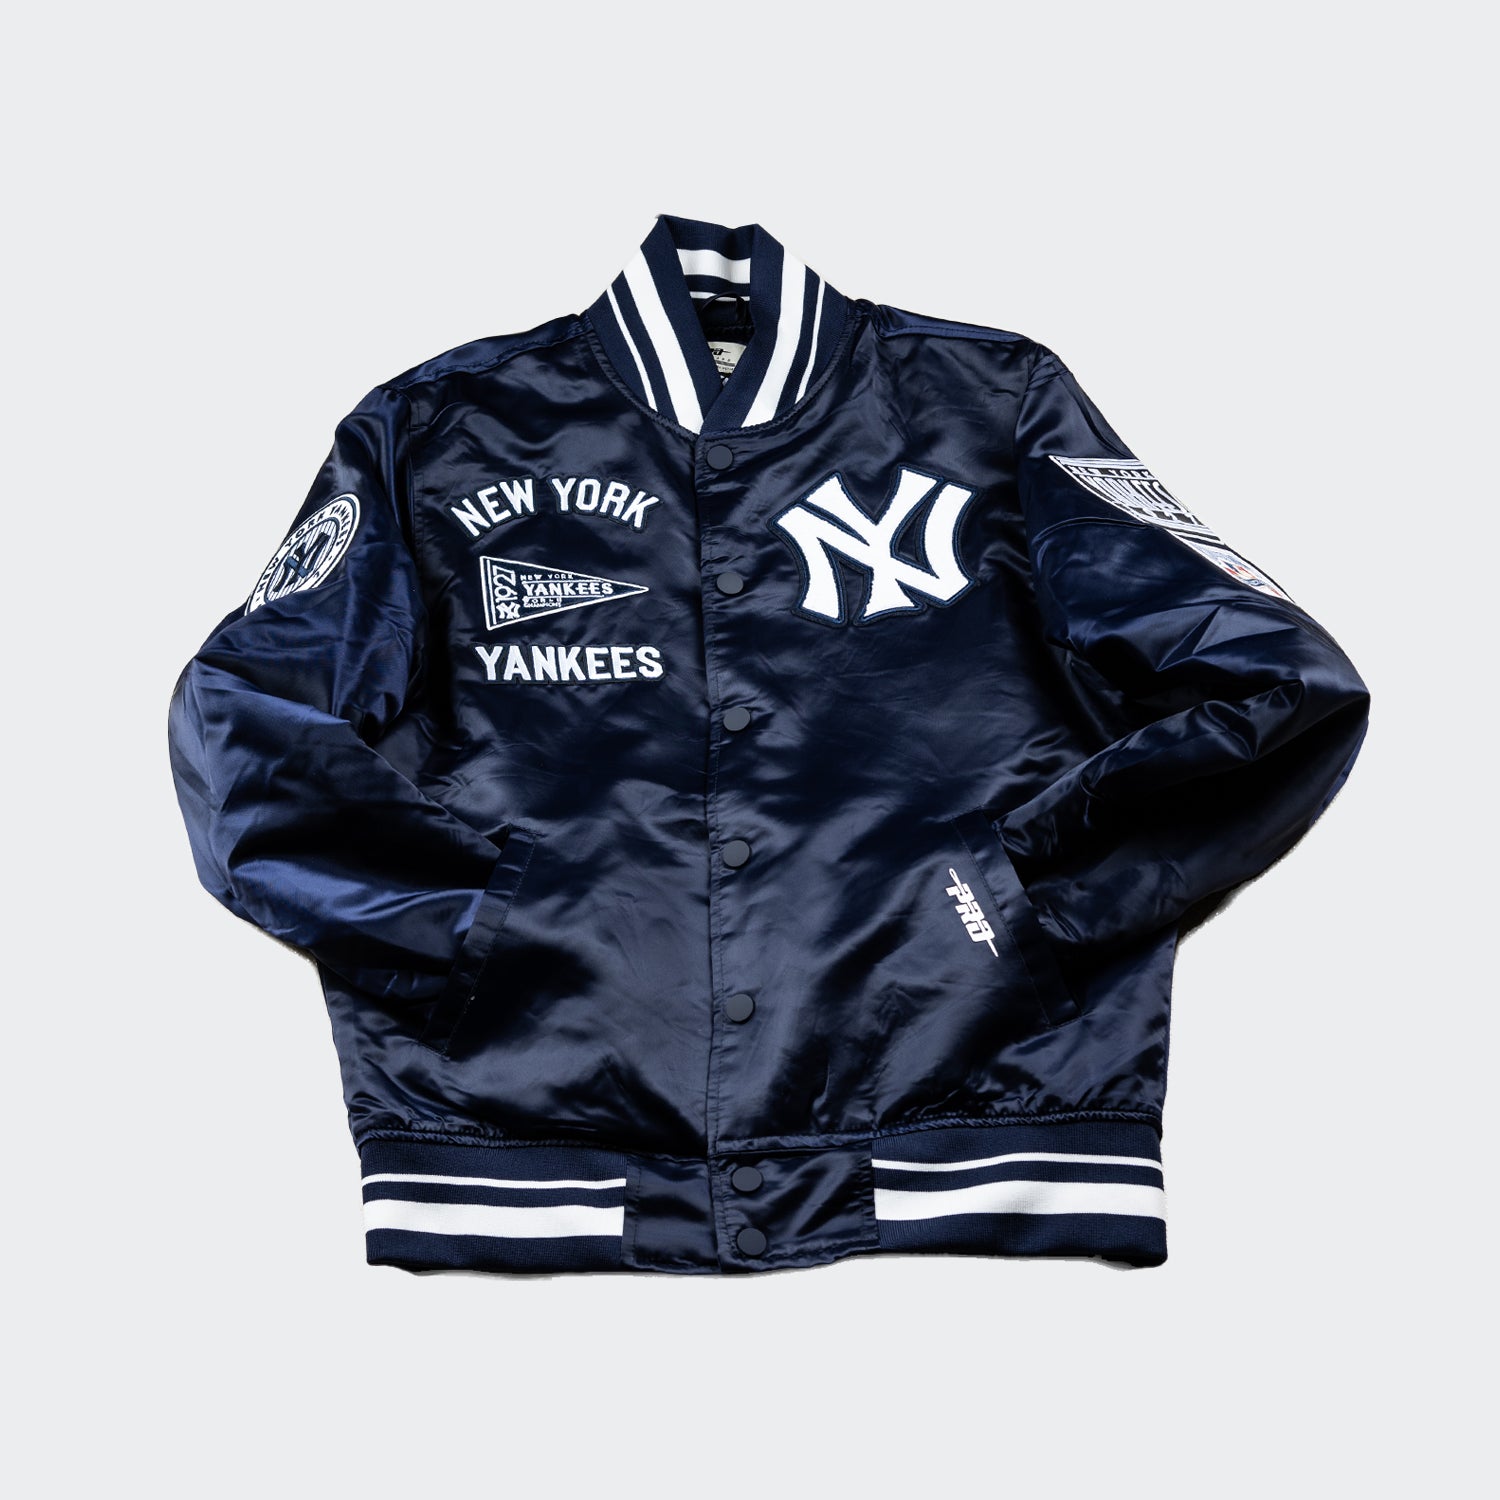 1927 REPLICA NEW YORK YANKEES MITCHELL & NESS JACKET - NEW W/TAGS -  HIGH QUALITY